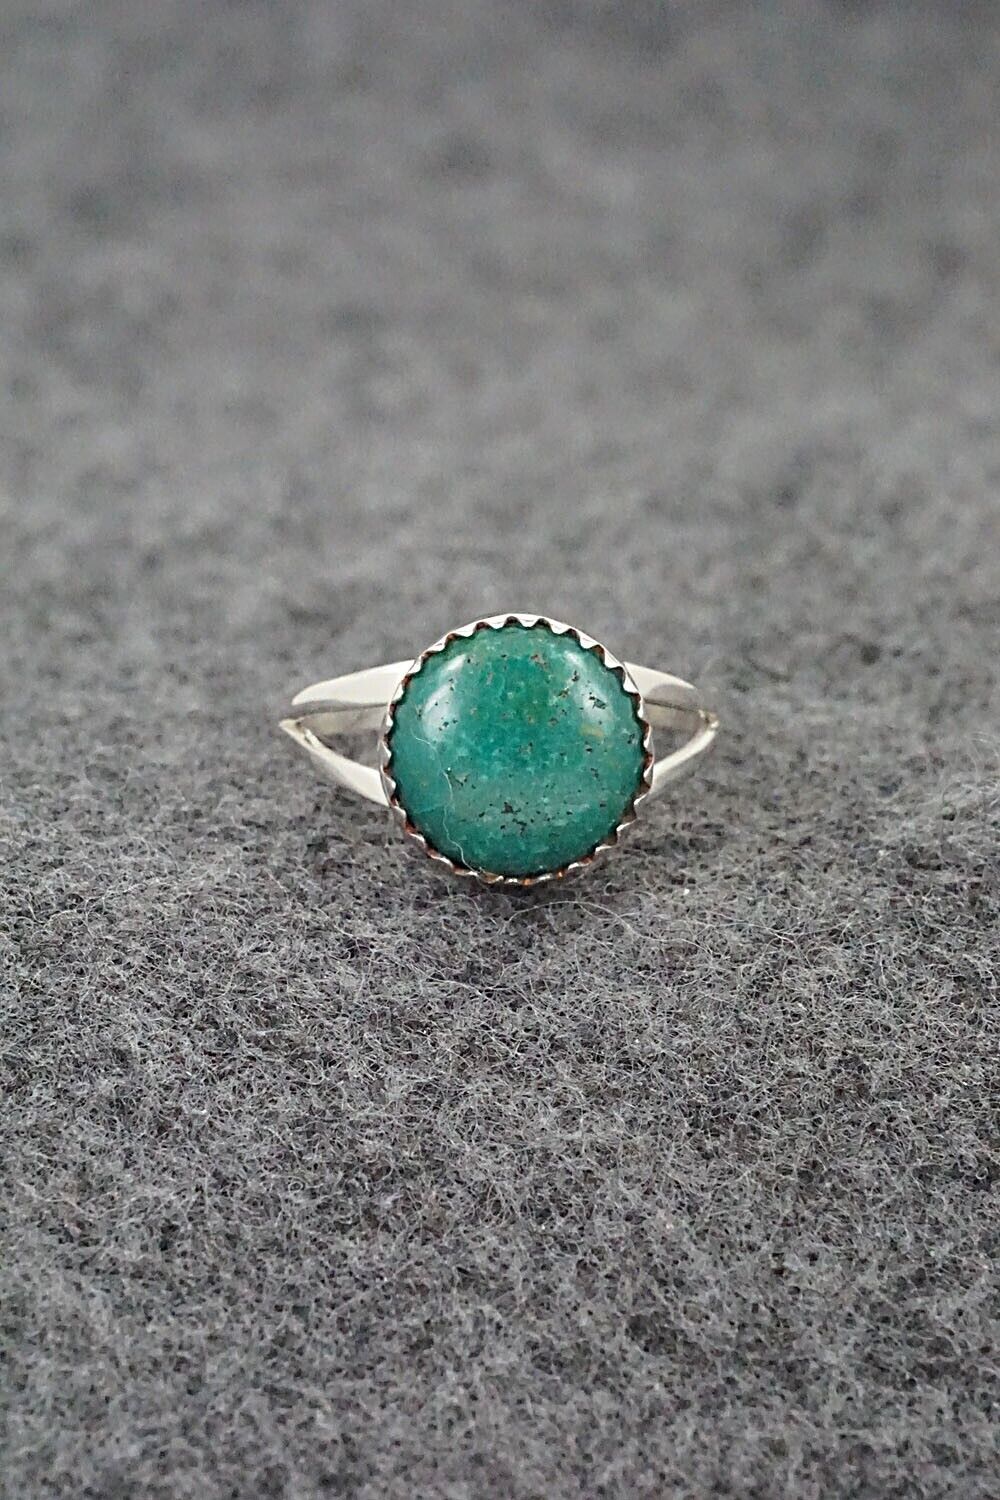 Turquoise & Sterling Silver Ring - Robert Martinez - Size 5.75